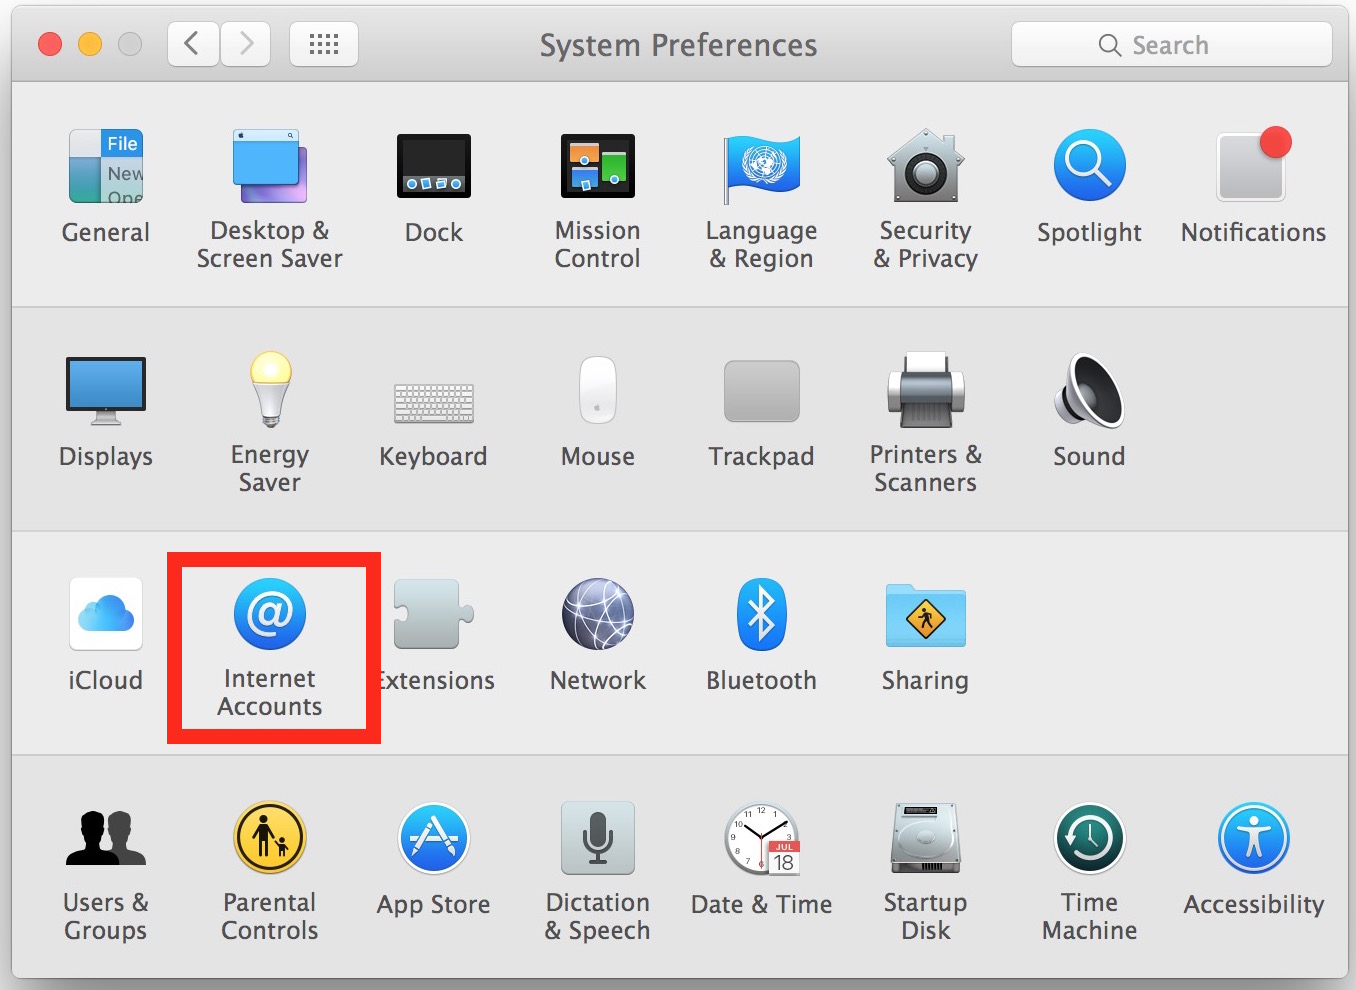 Choose Internet Accounts in System preferences